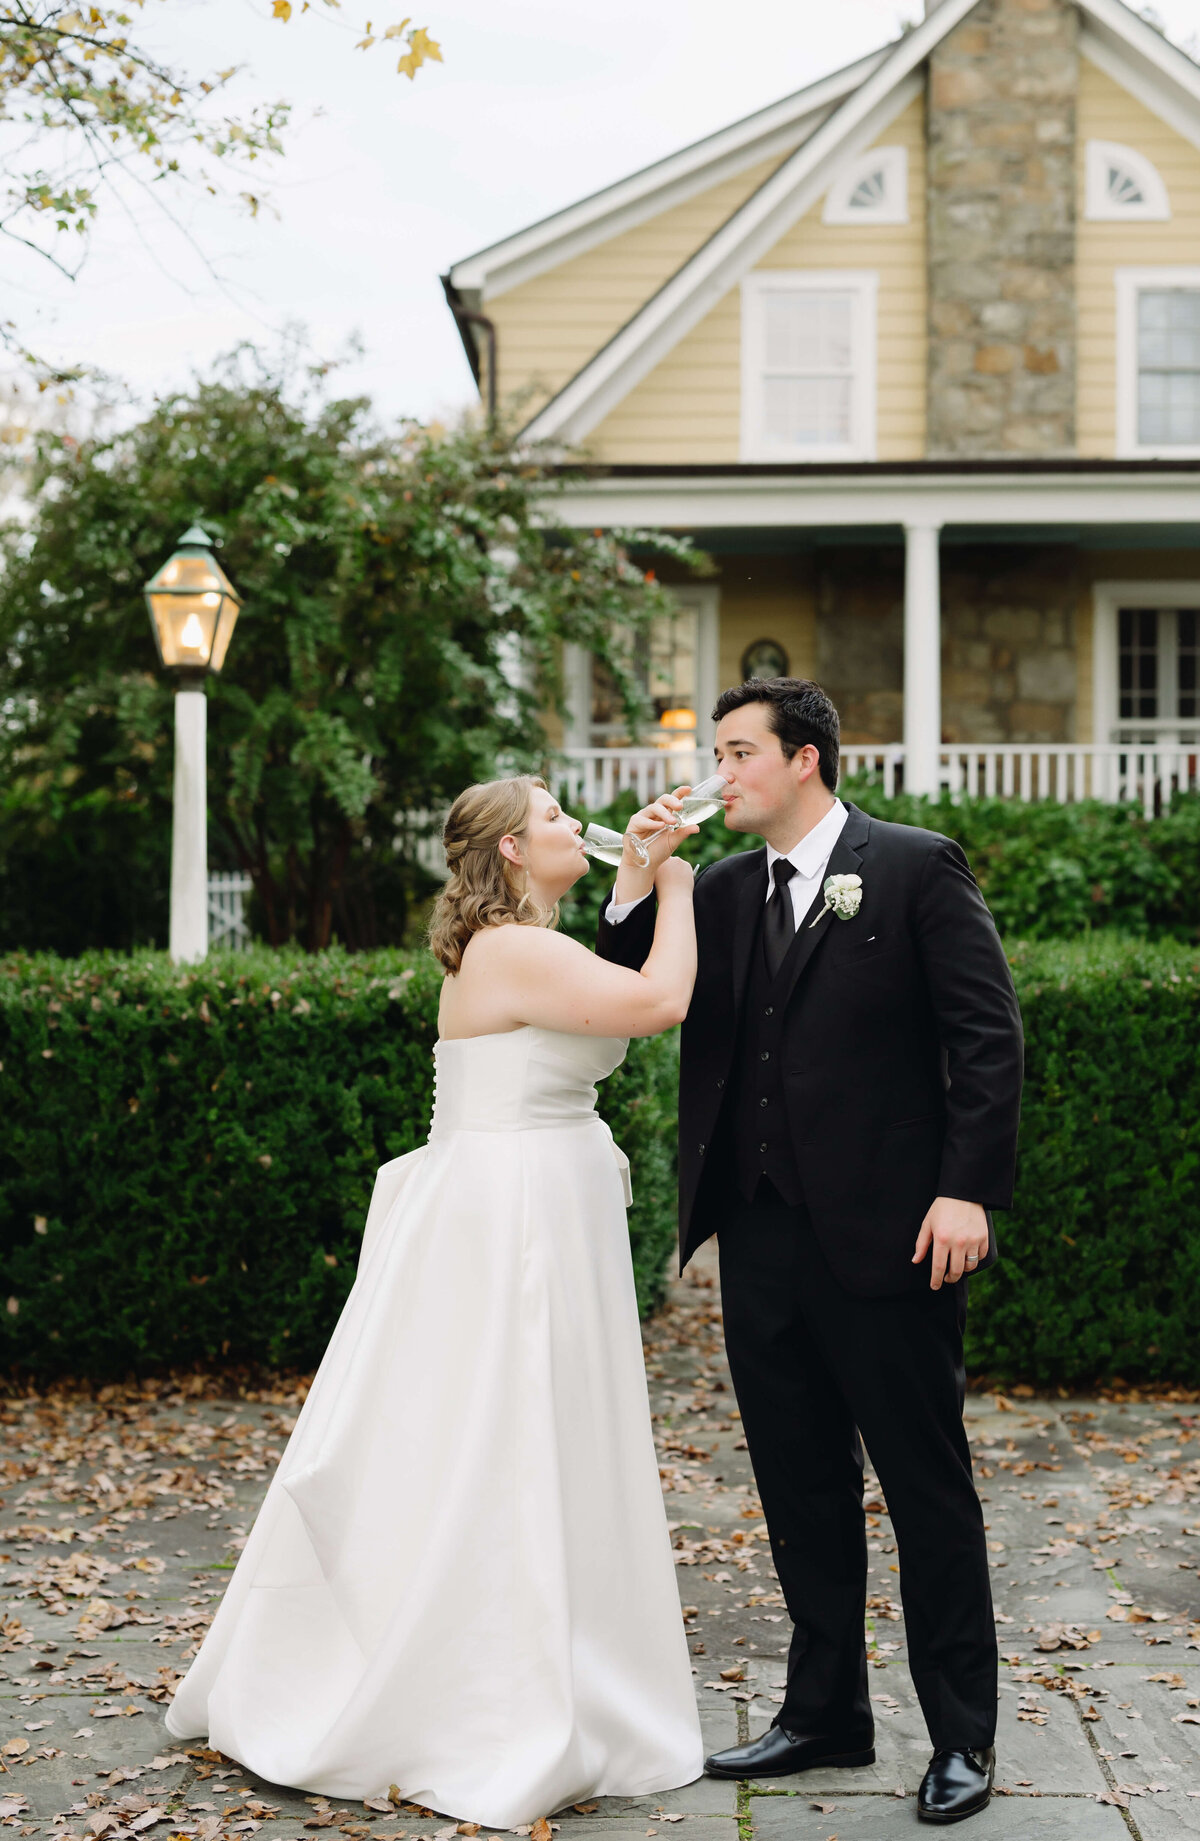 Virginia wedding photographer captures bride and groom sharing a glass of champagne together outside of their Richmond wedding venues front lawn